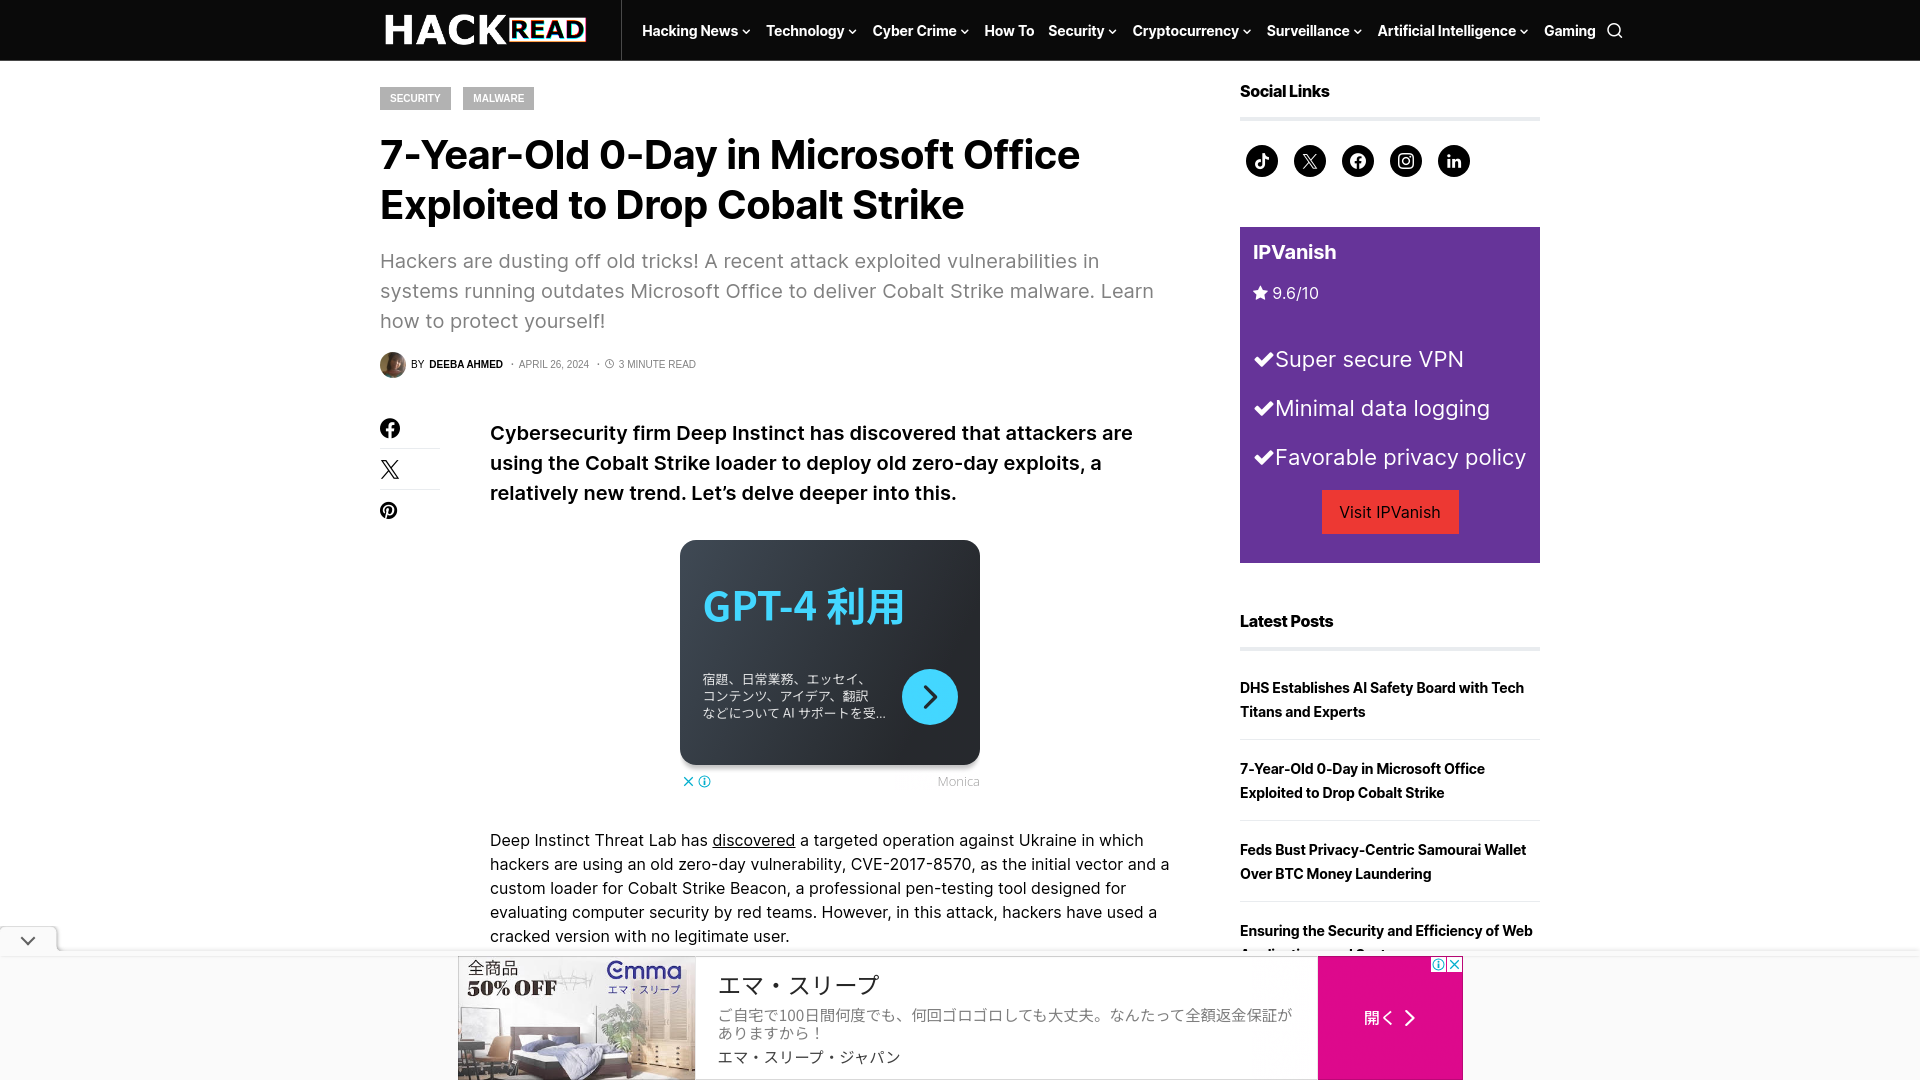 7-Year-Old 0-Day in Microsoft Office Exploited to Drop Cobalt Strike